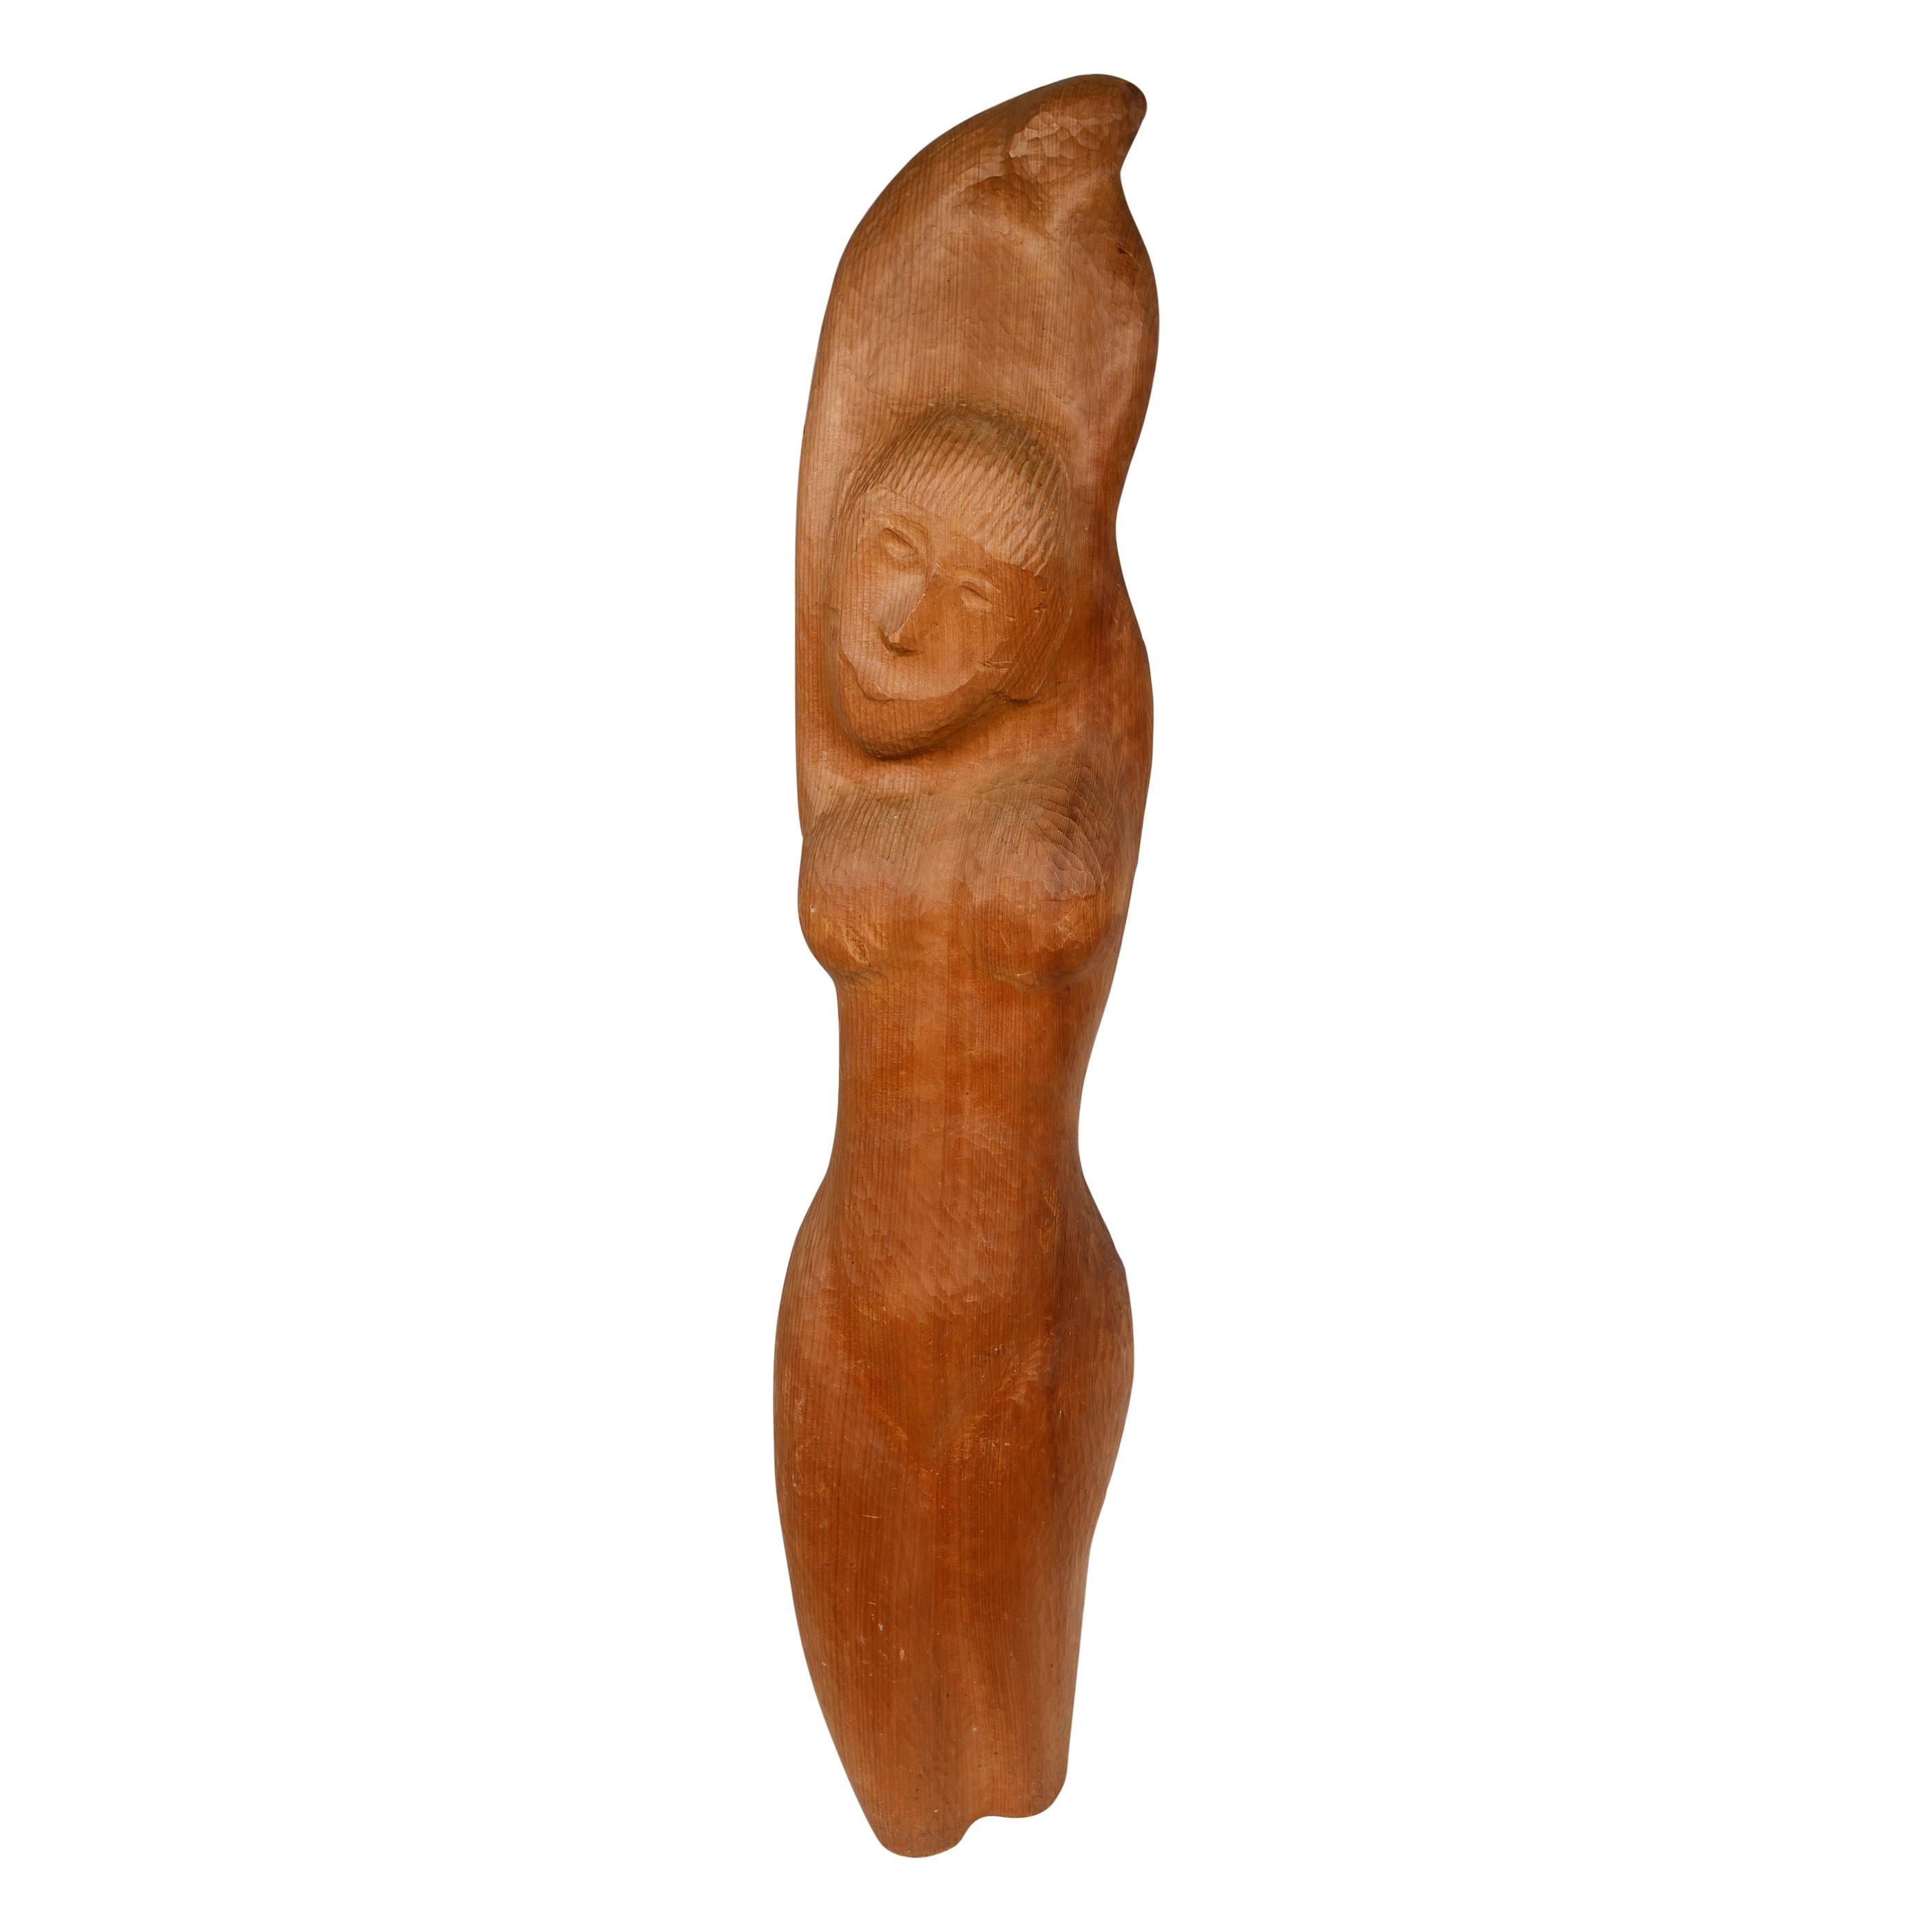 Large Folk Art Wood Carving of a Nude Woman